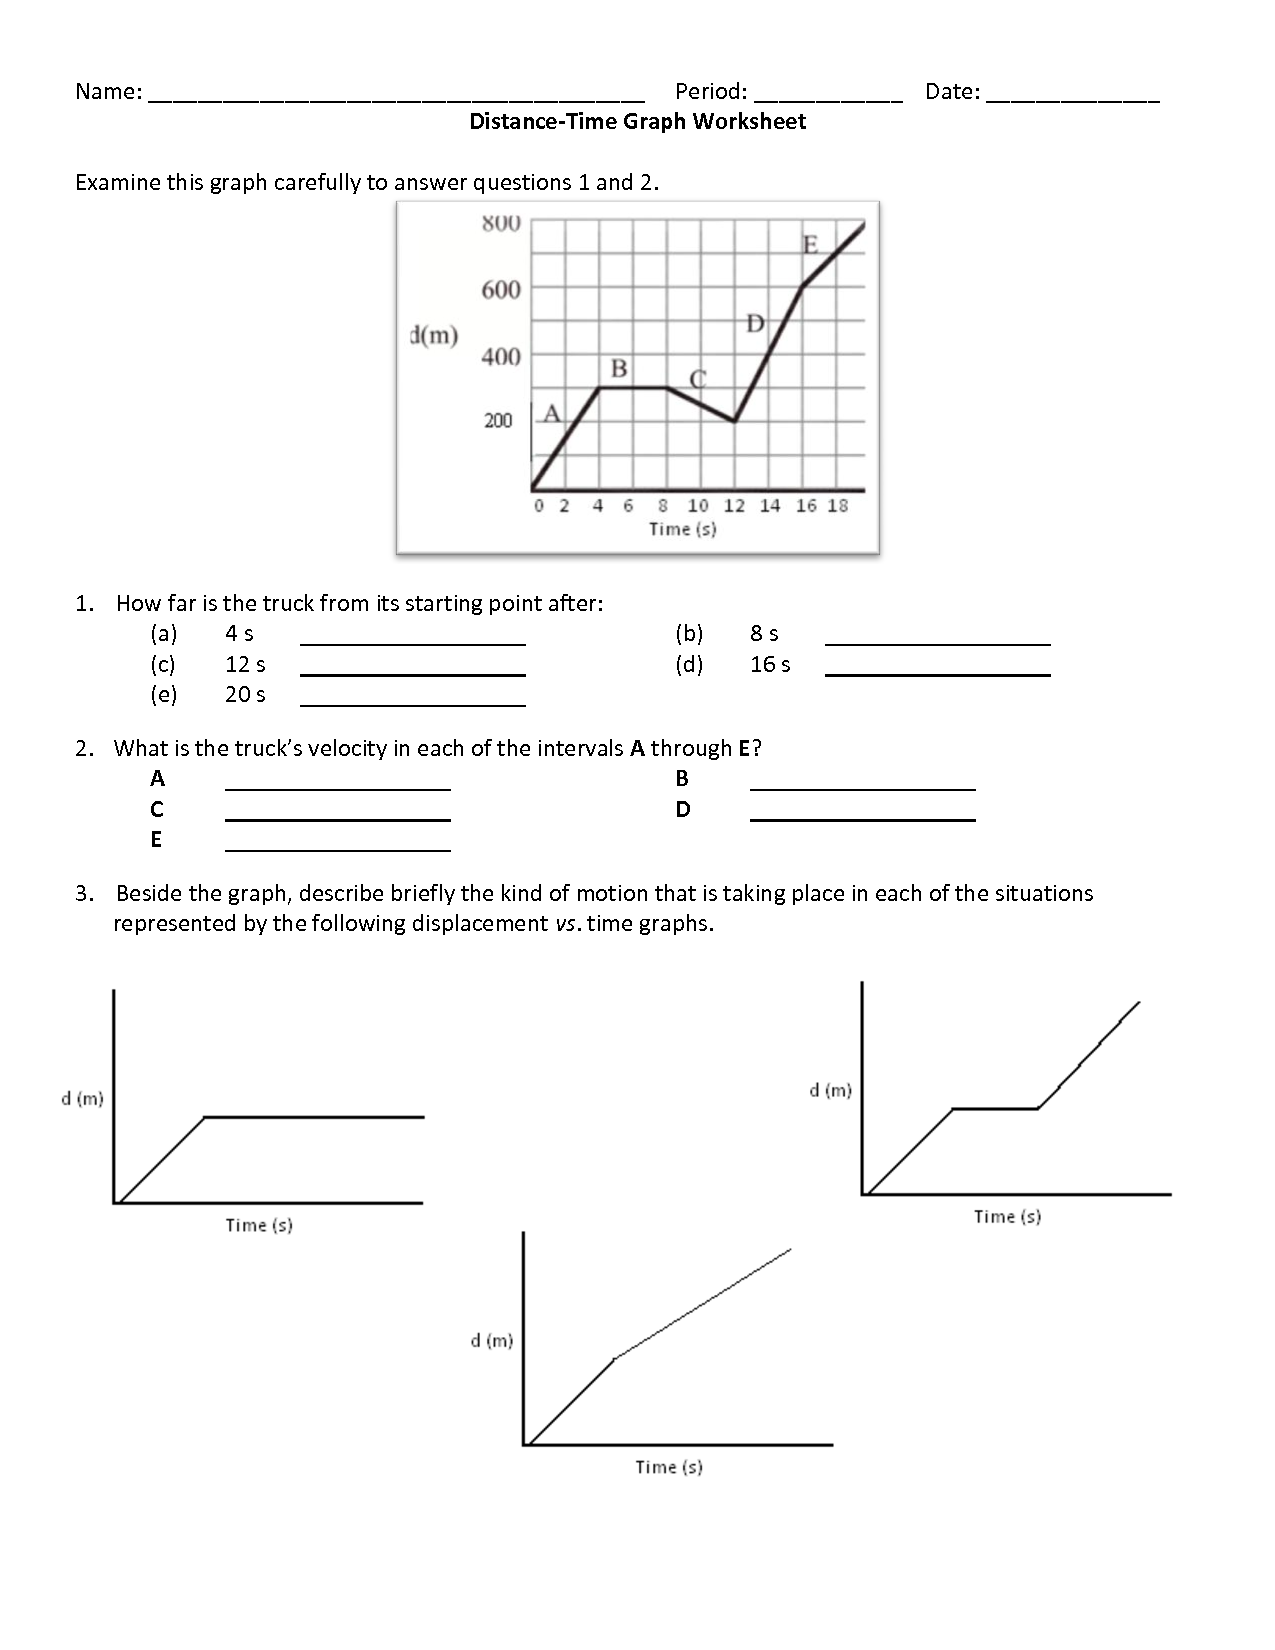 distance-vs-time-graph-worksheet-with-answers-questinspire